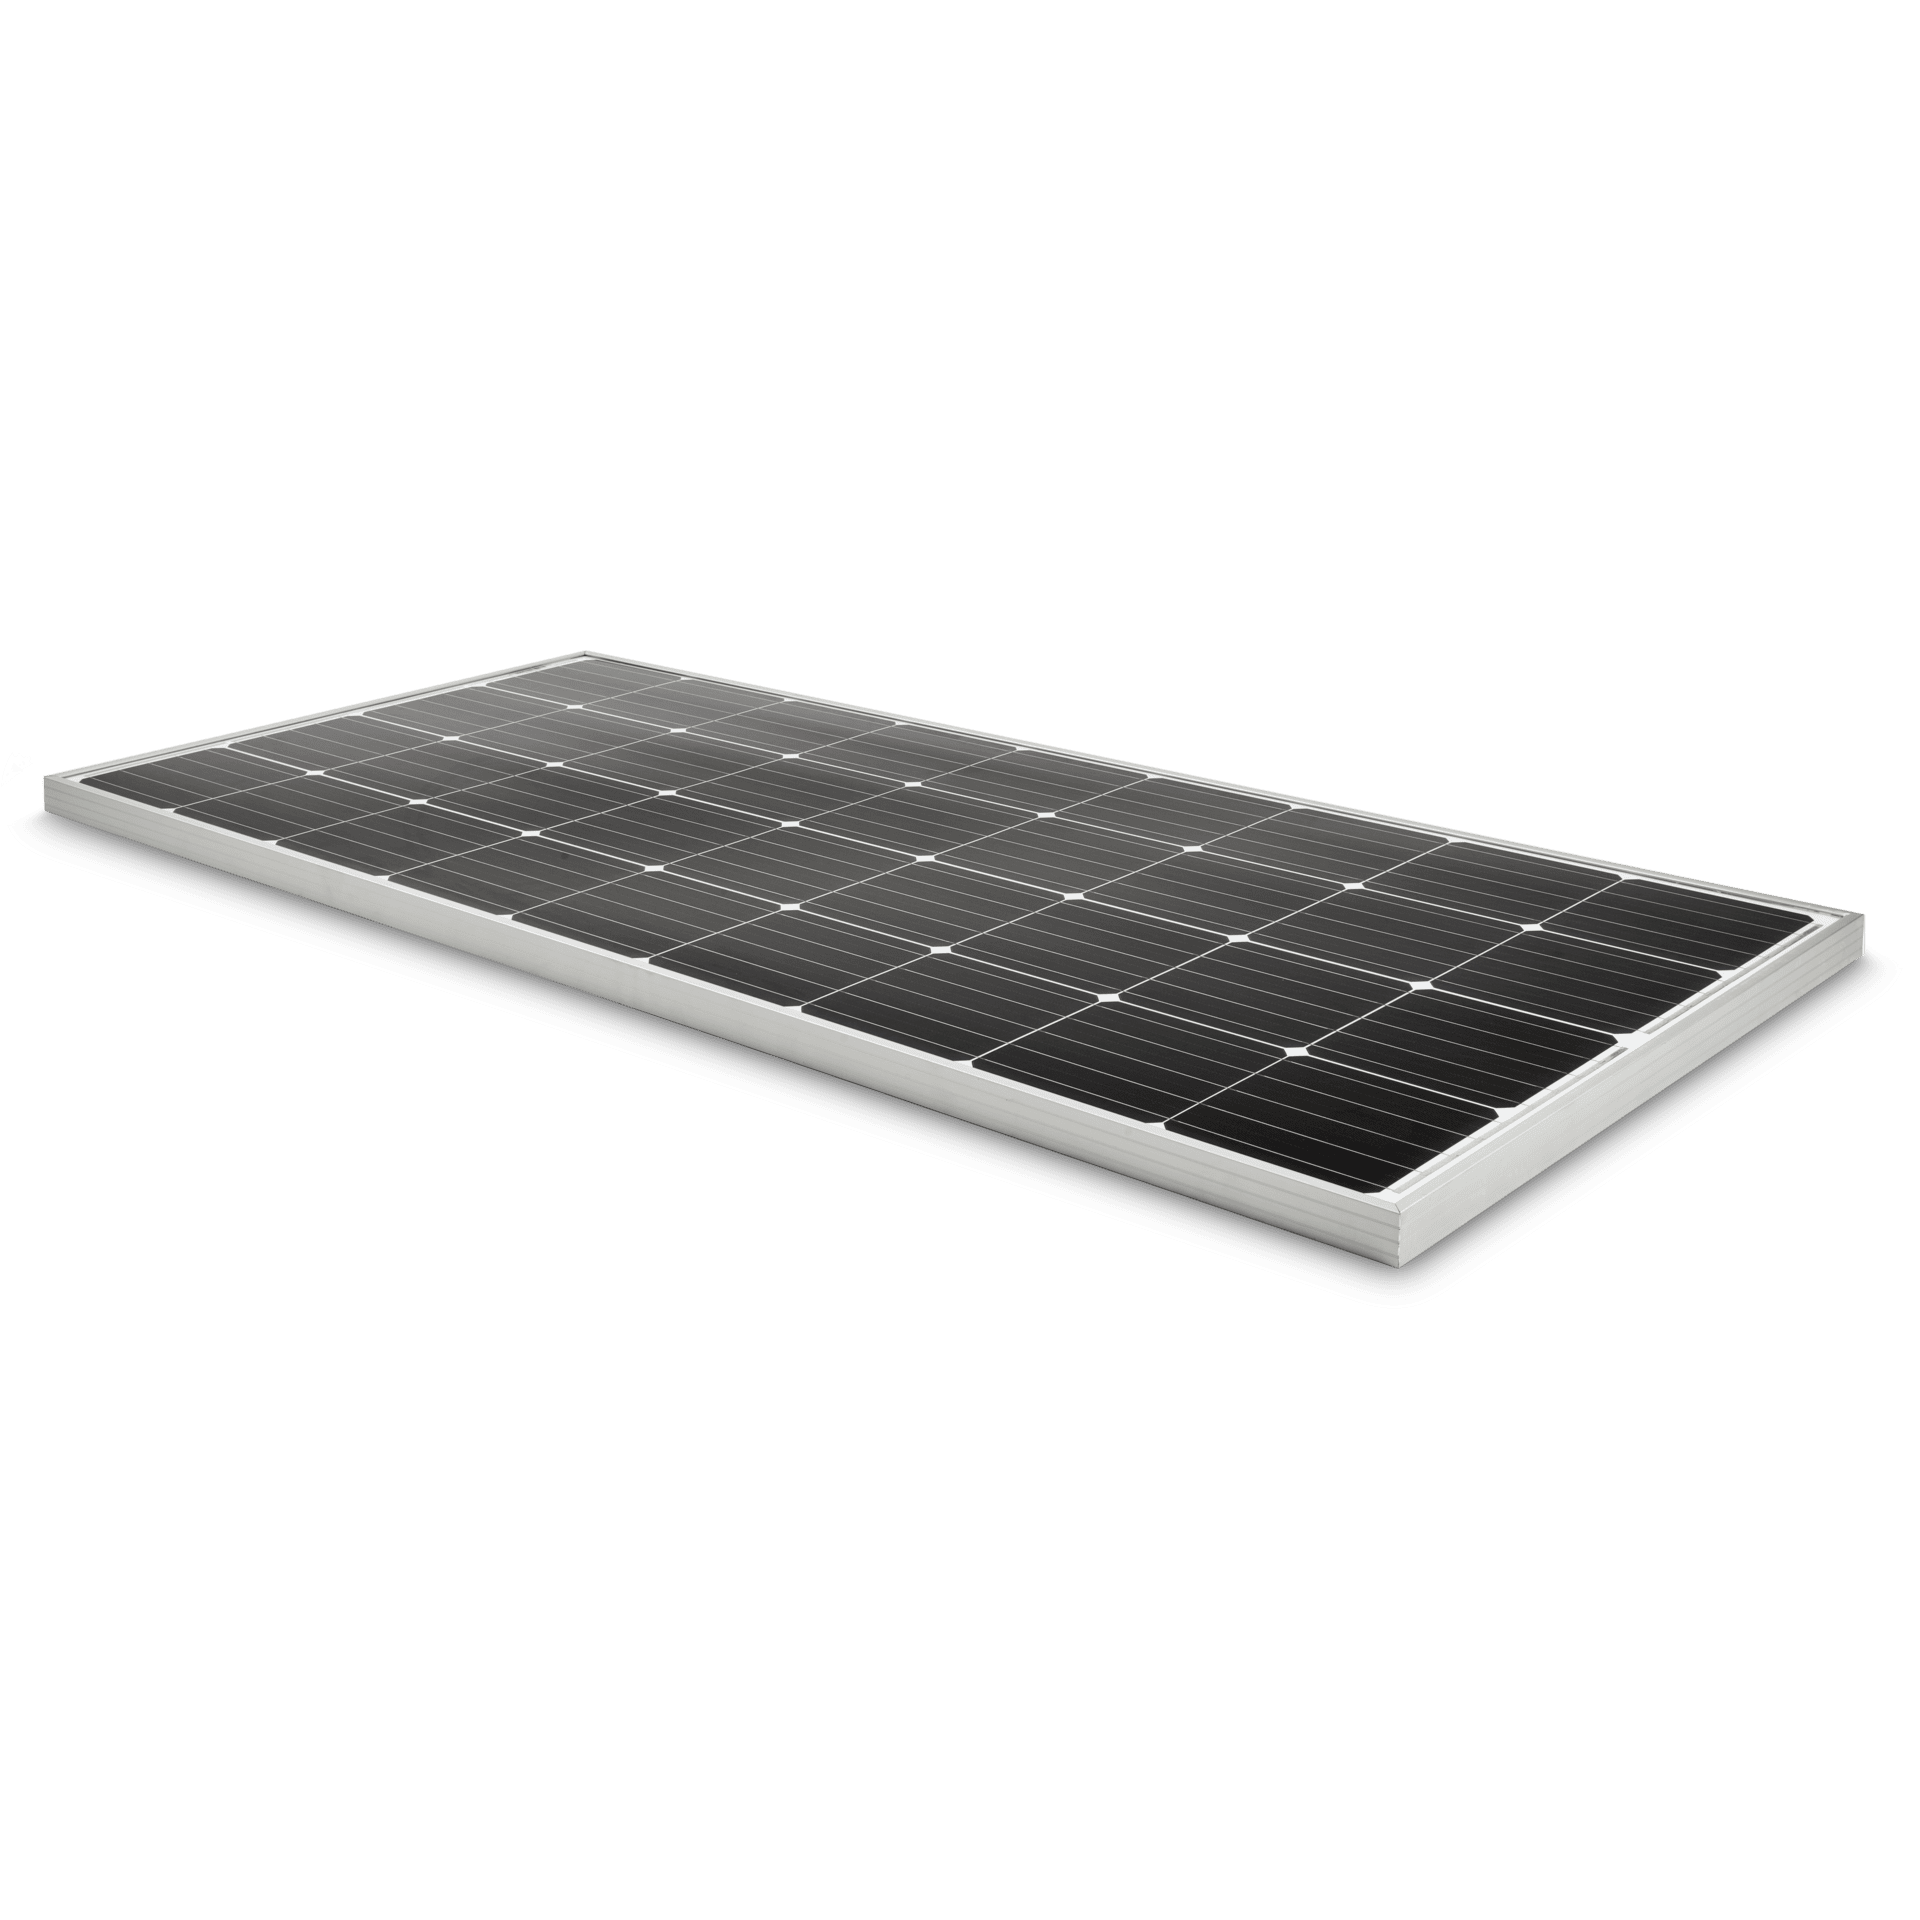 Dometic Roof Top Solar Panel 160w